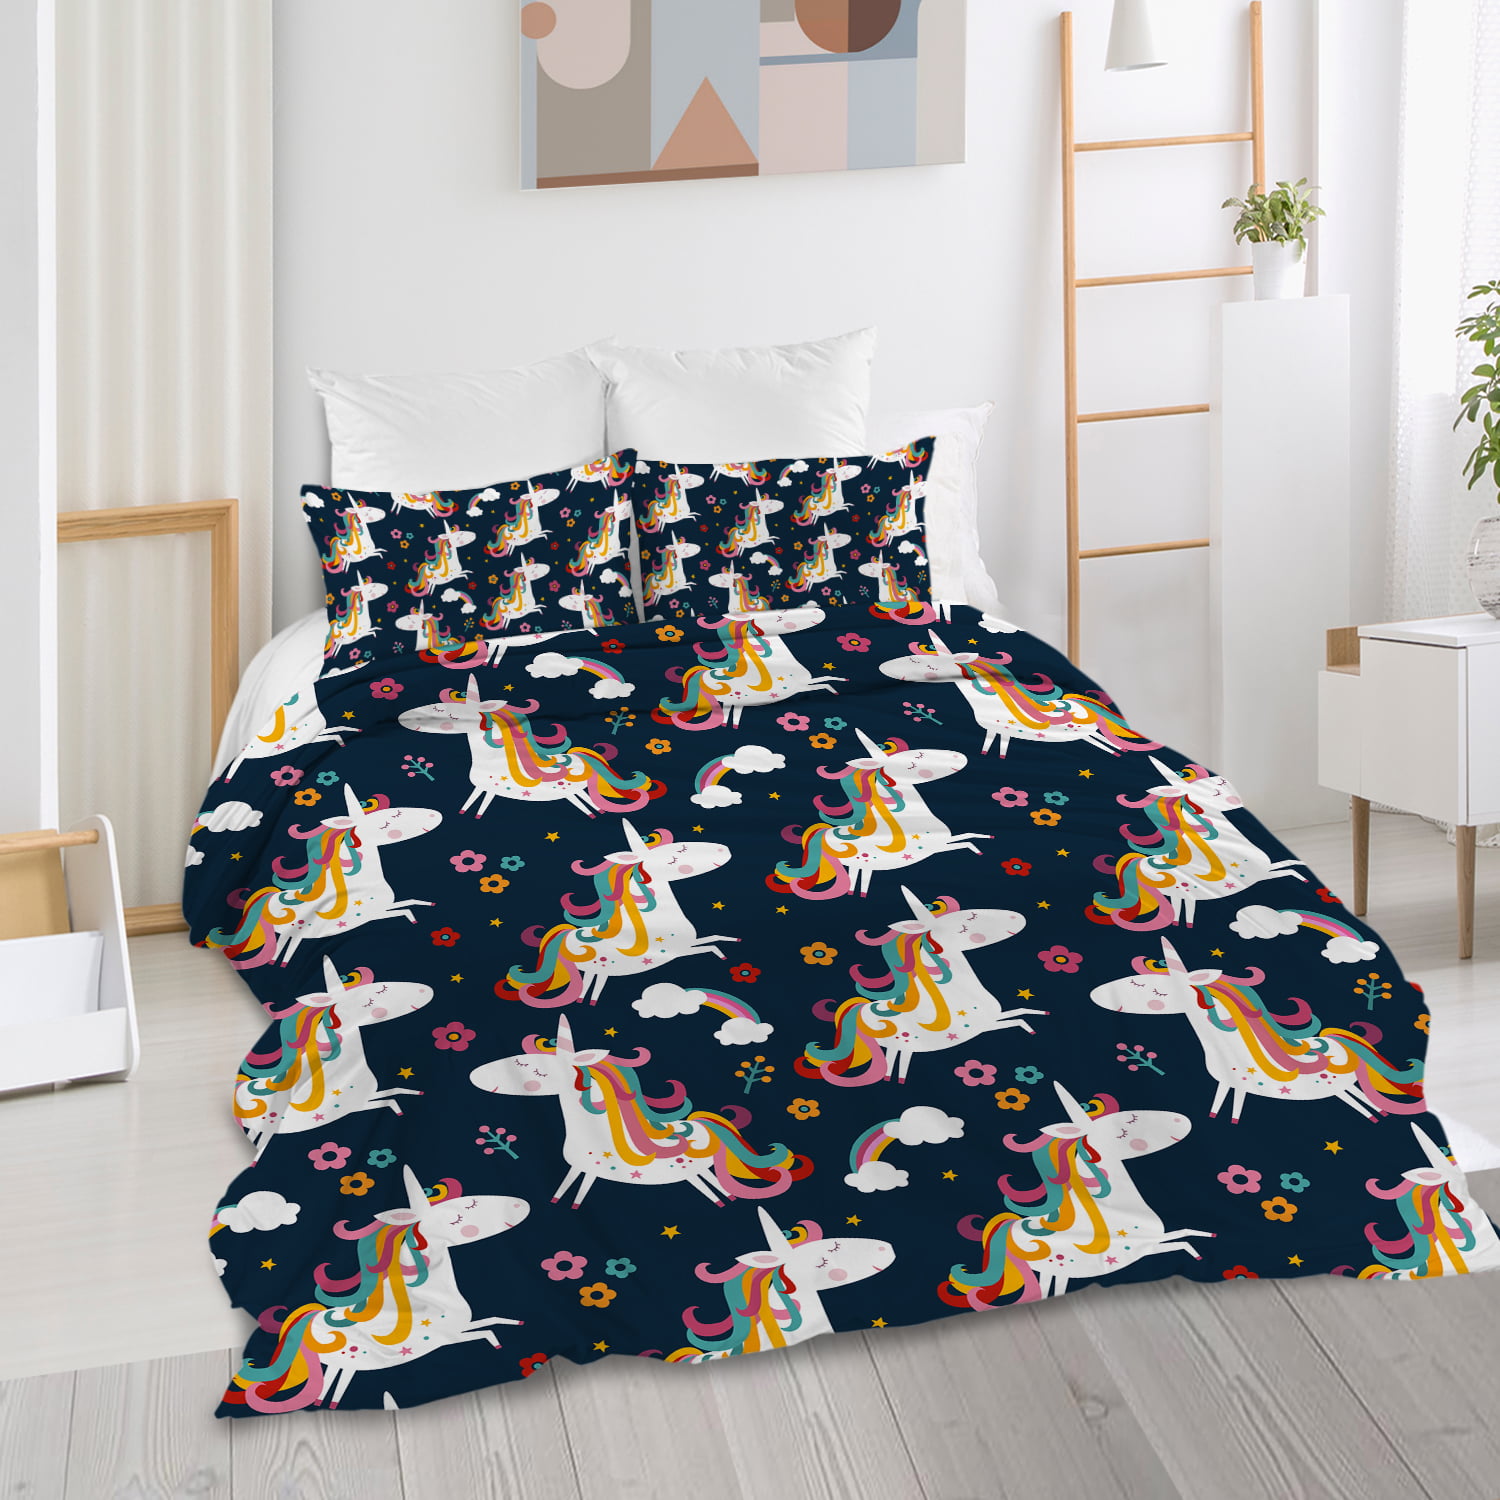 KFZ Unicorn Queen Duvet Cover Queen 3 Piece Kids Bed Sheets with 90x90 Unicorn Duvet Cover Bedding Comforters & Sets for Kids Bed Frame No Comforter 2 Pillow Covers 